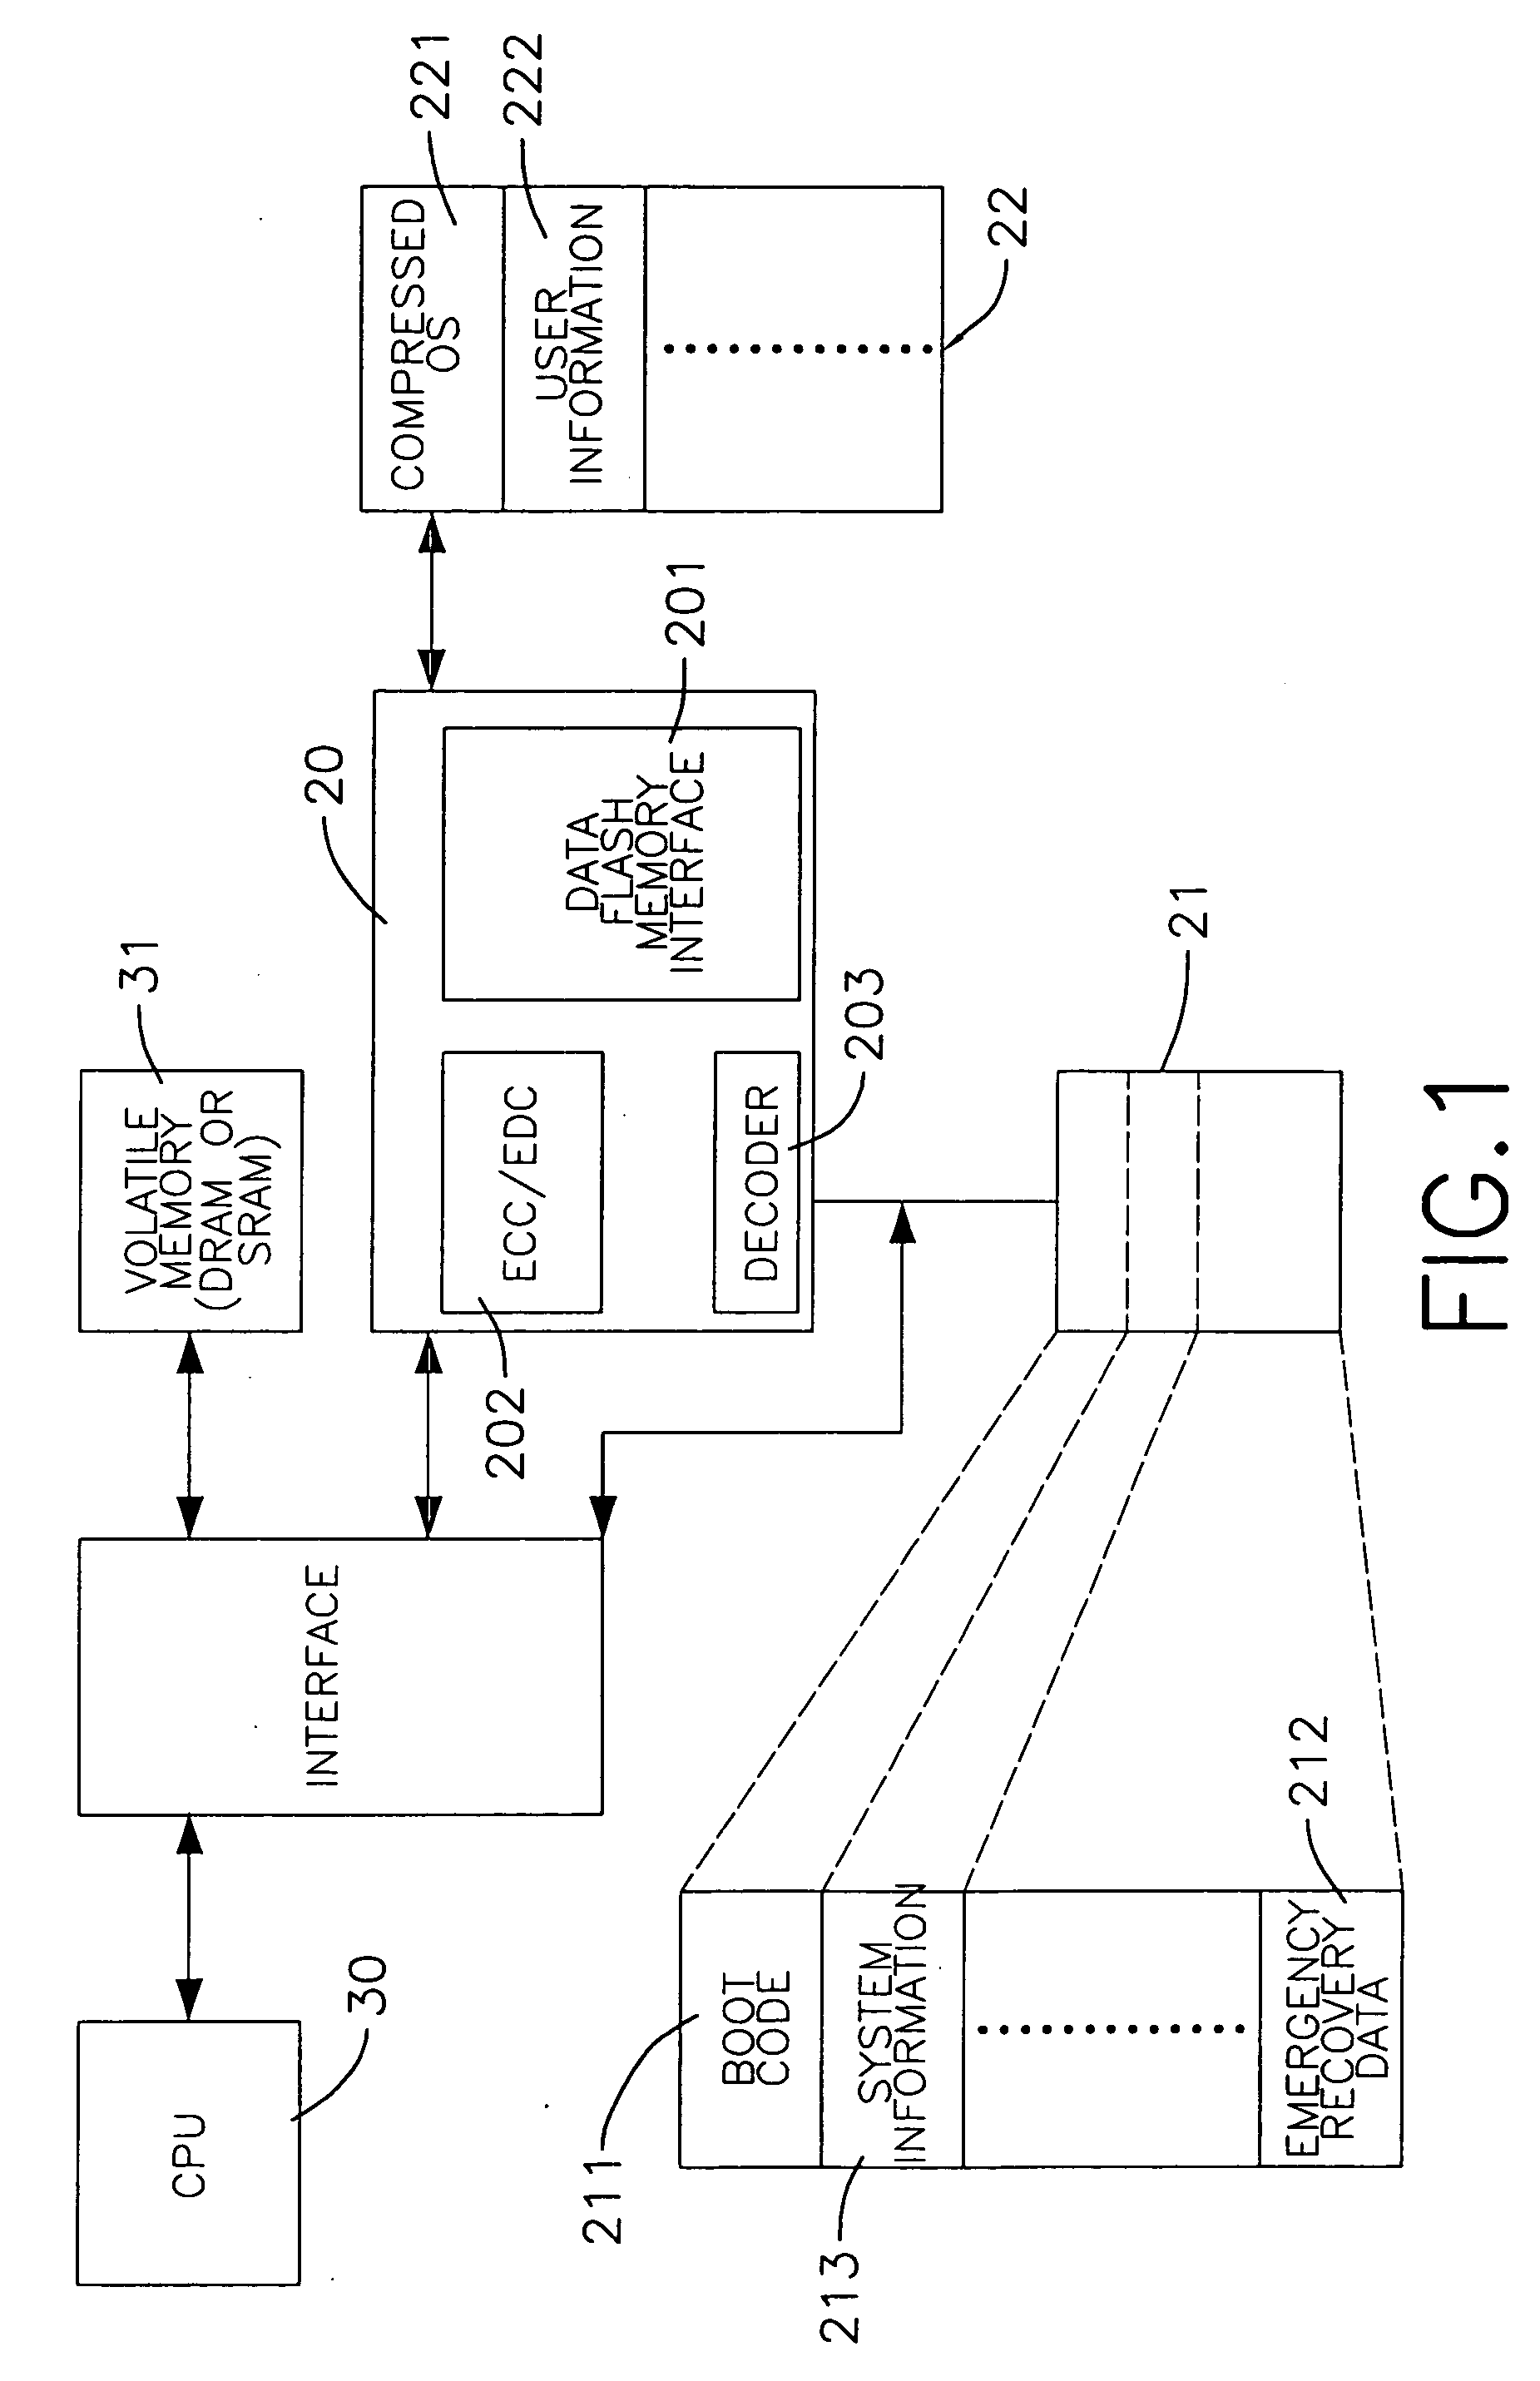 Memory system for an electronic device and the method for controlling the same